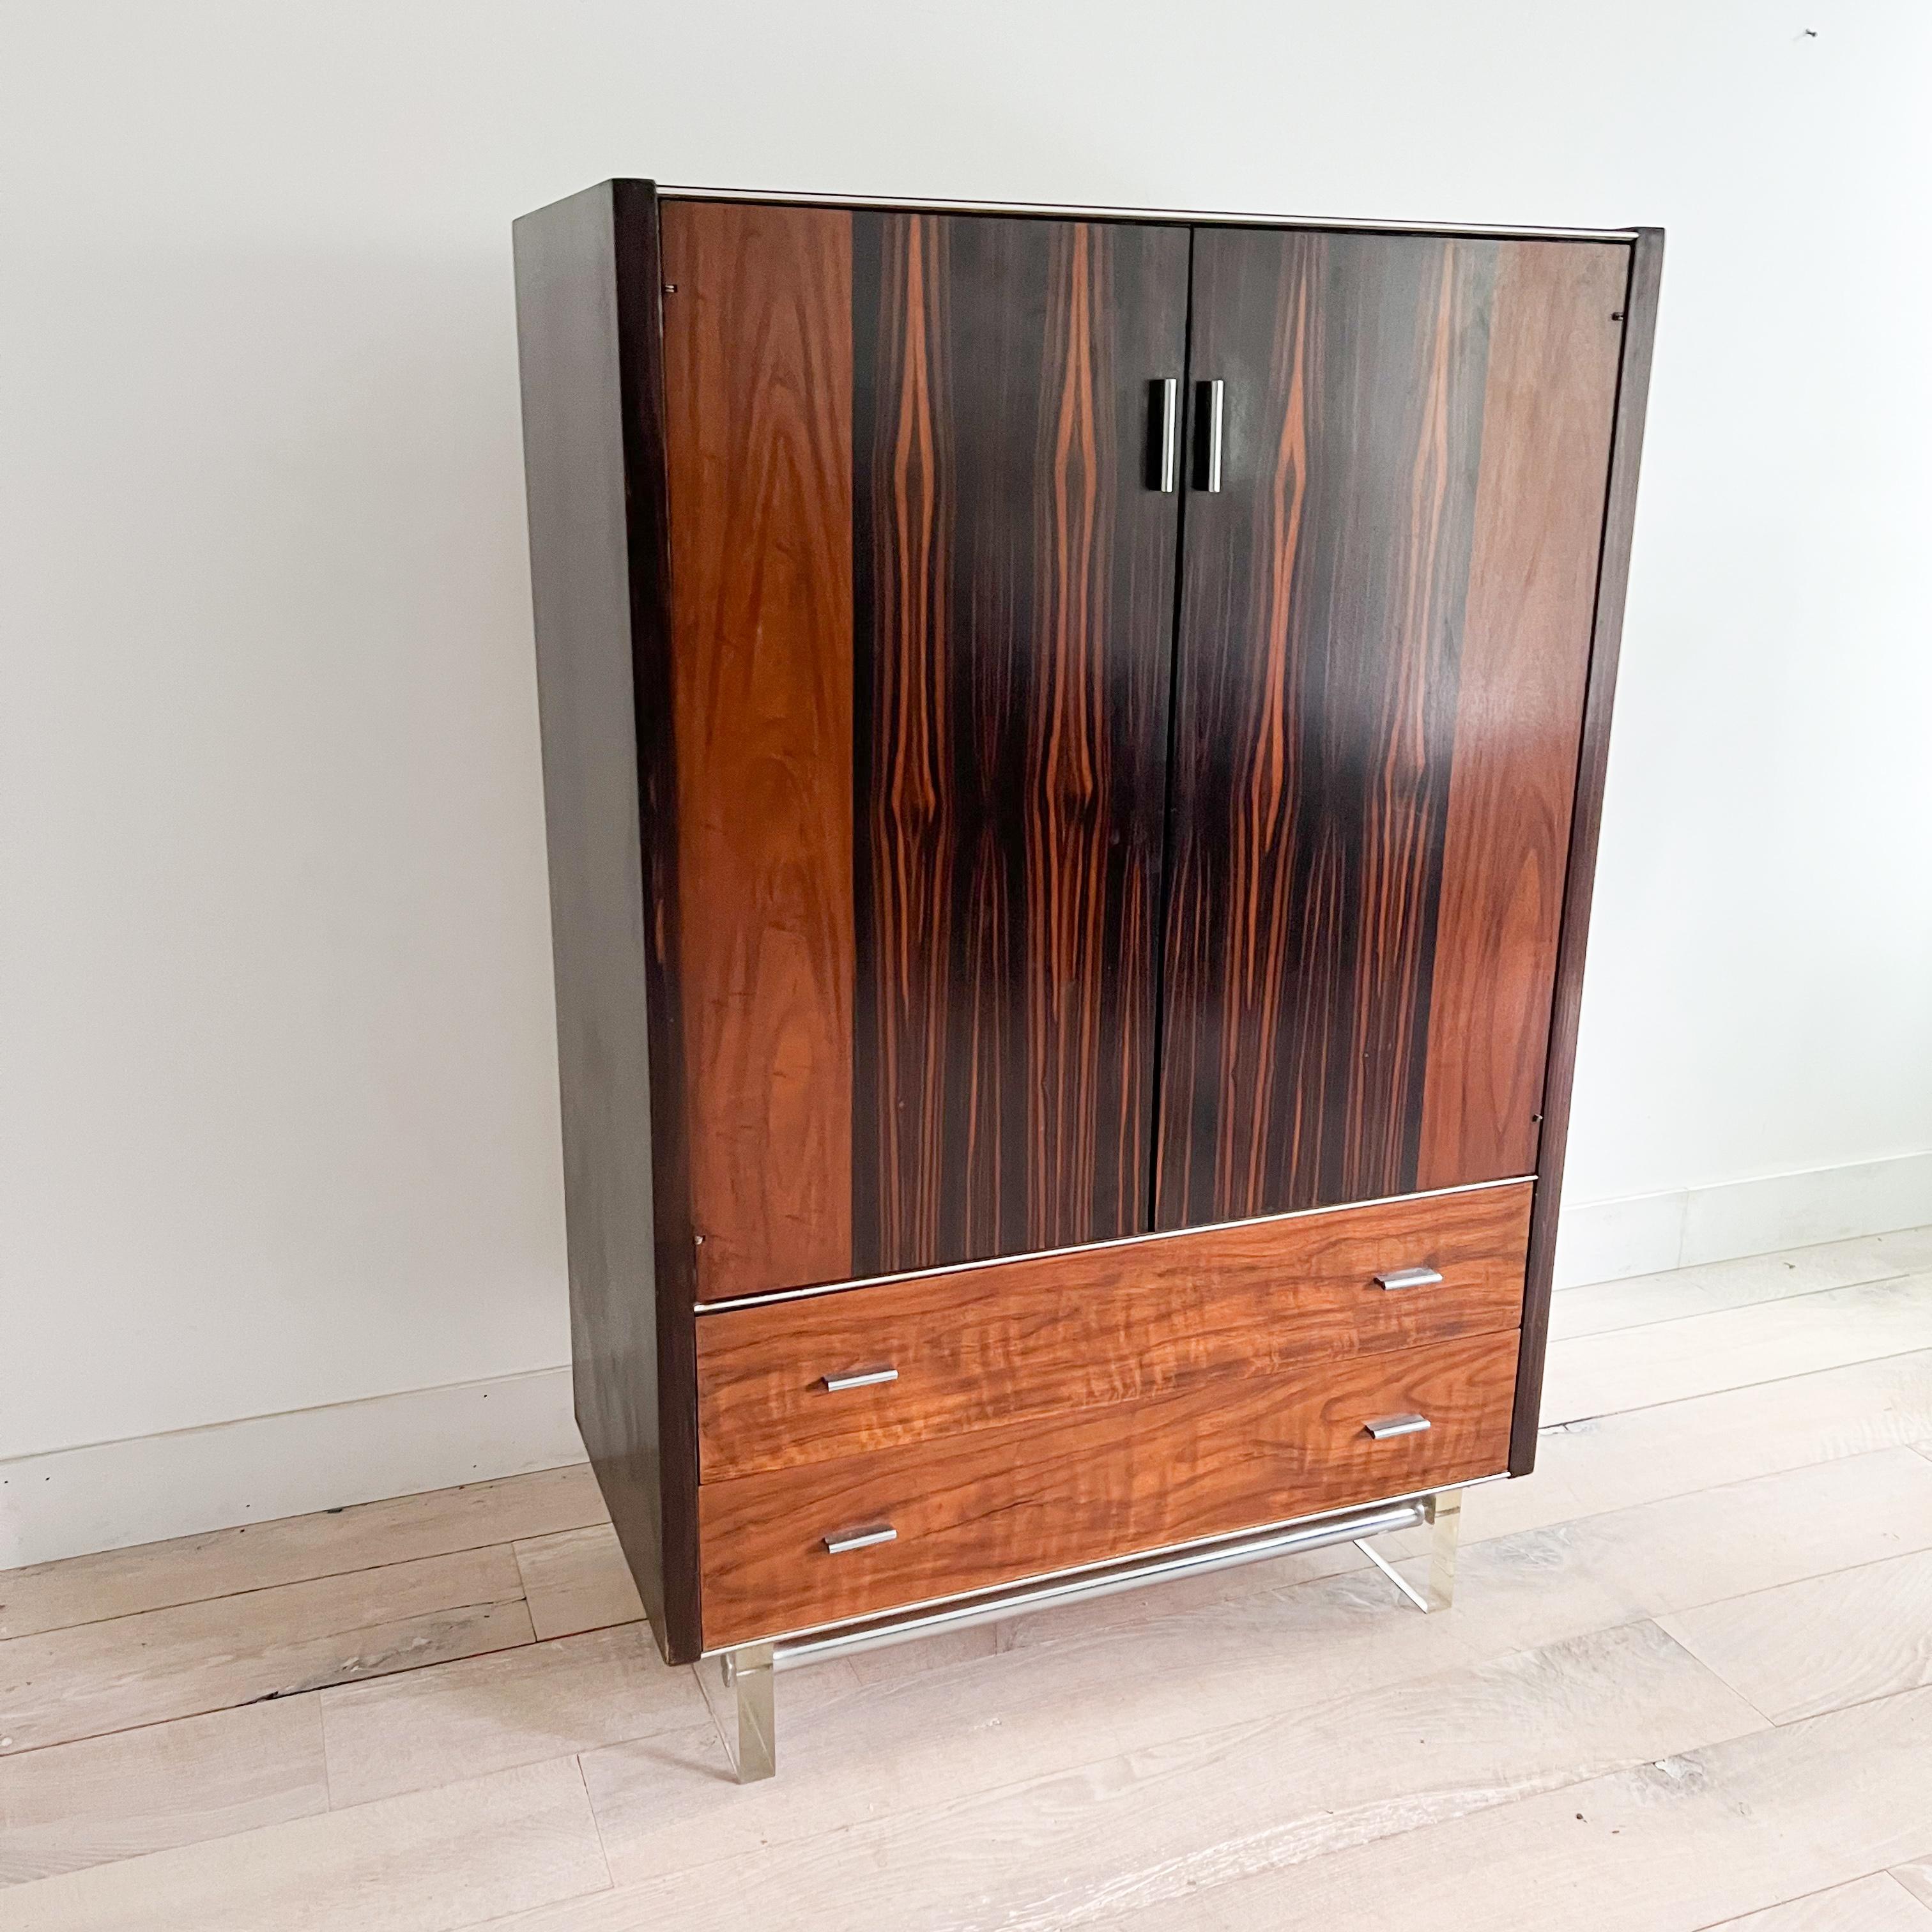 Add a touch of timeless elegance to your space with this hard-to-find piece from the Mid-Century Modern era. Crafted from luxurious rosewood and featuring a sleek lucite base, this gentlemen's chest by Modernage exudes